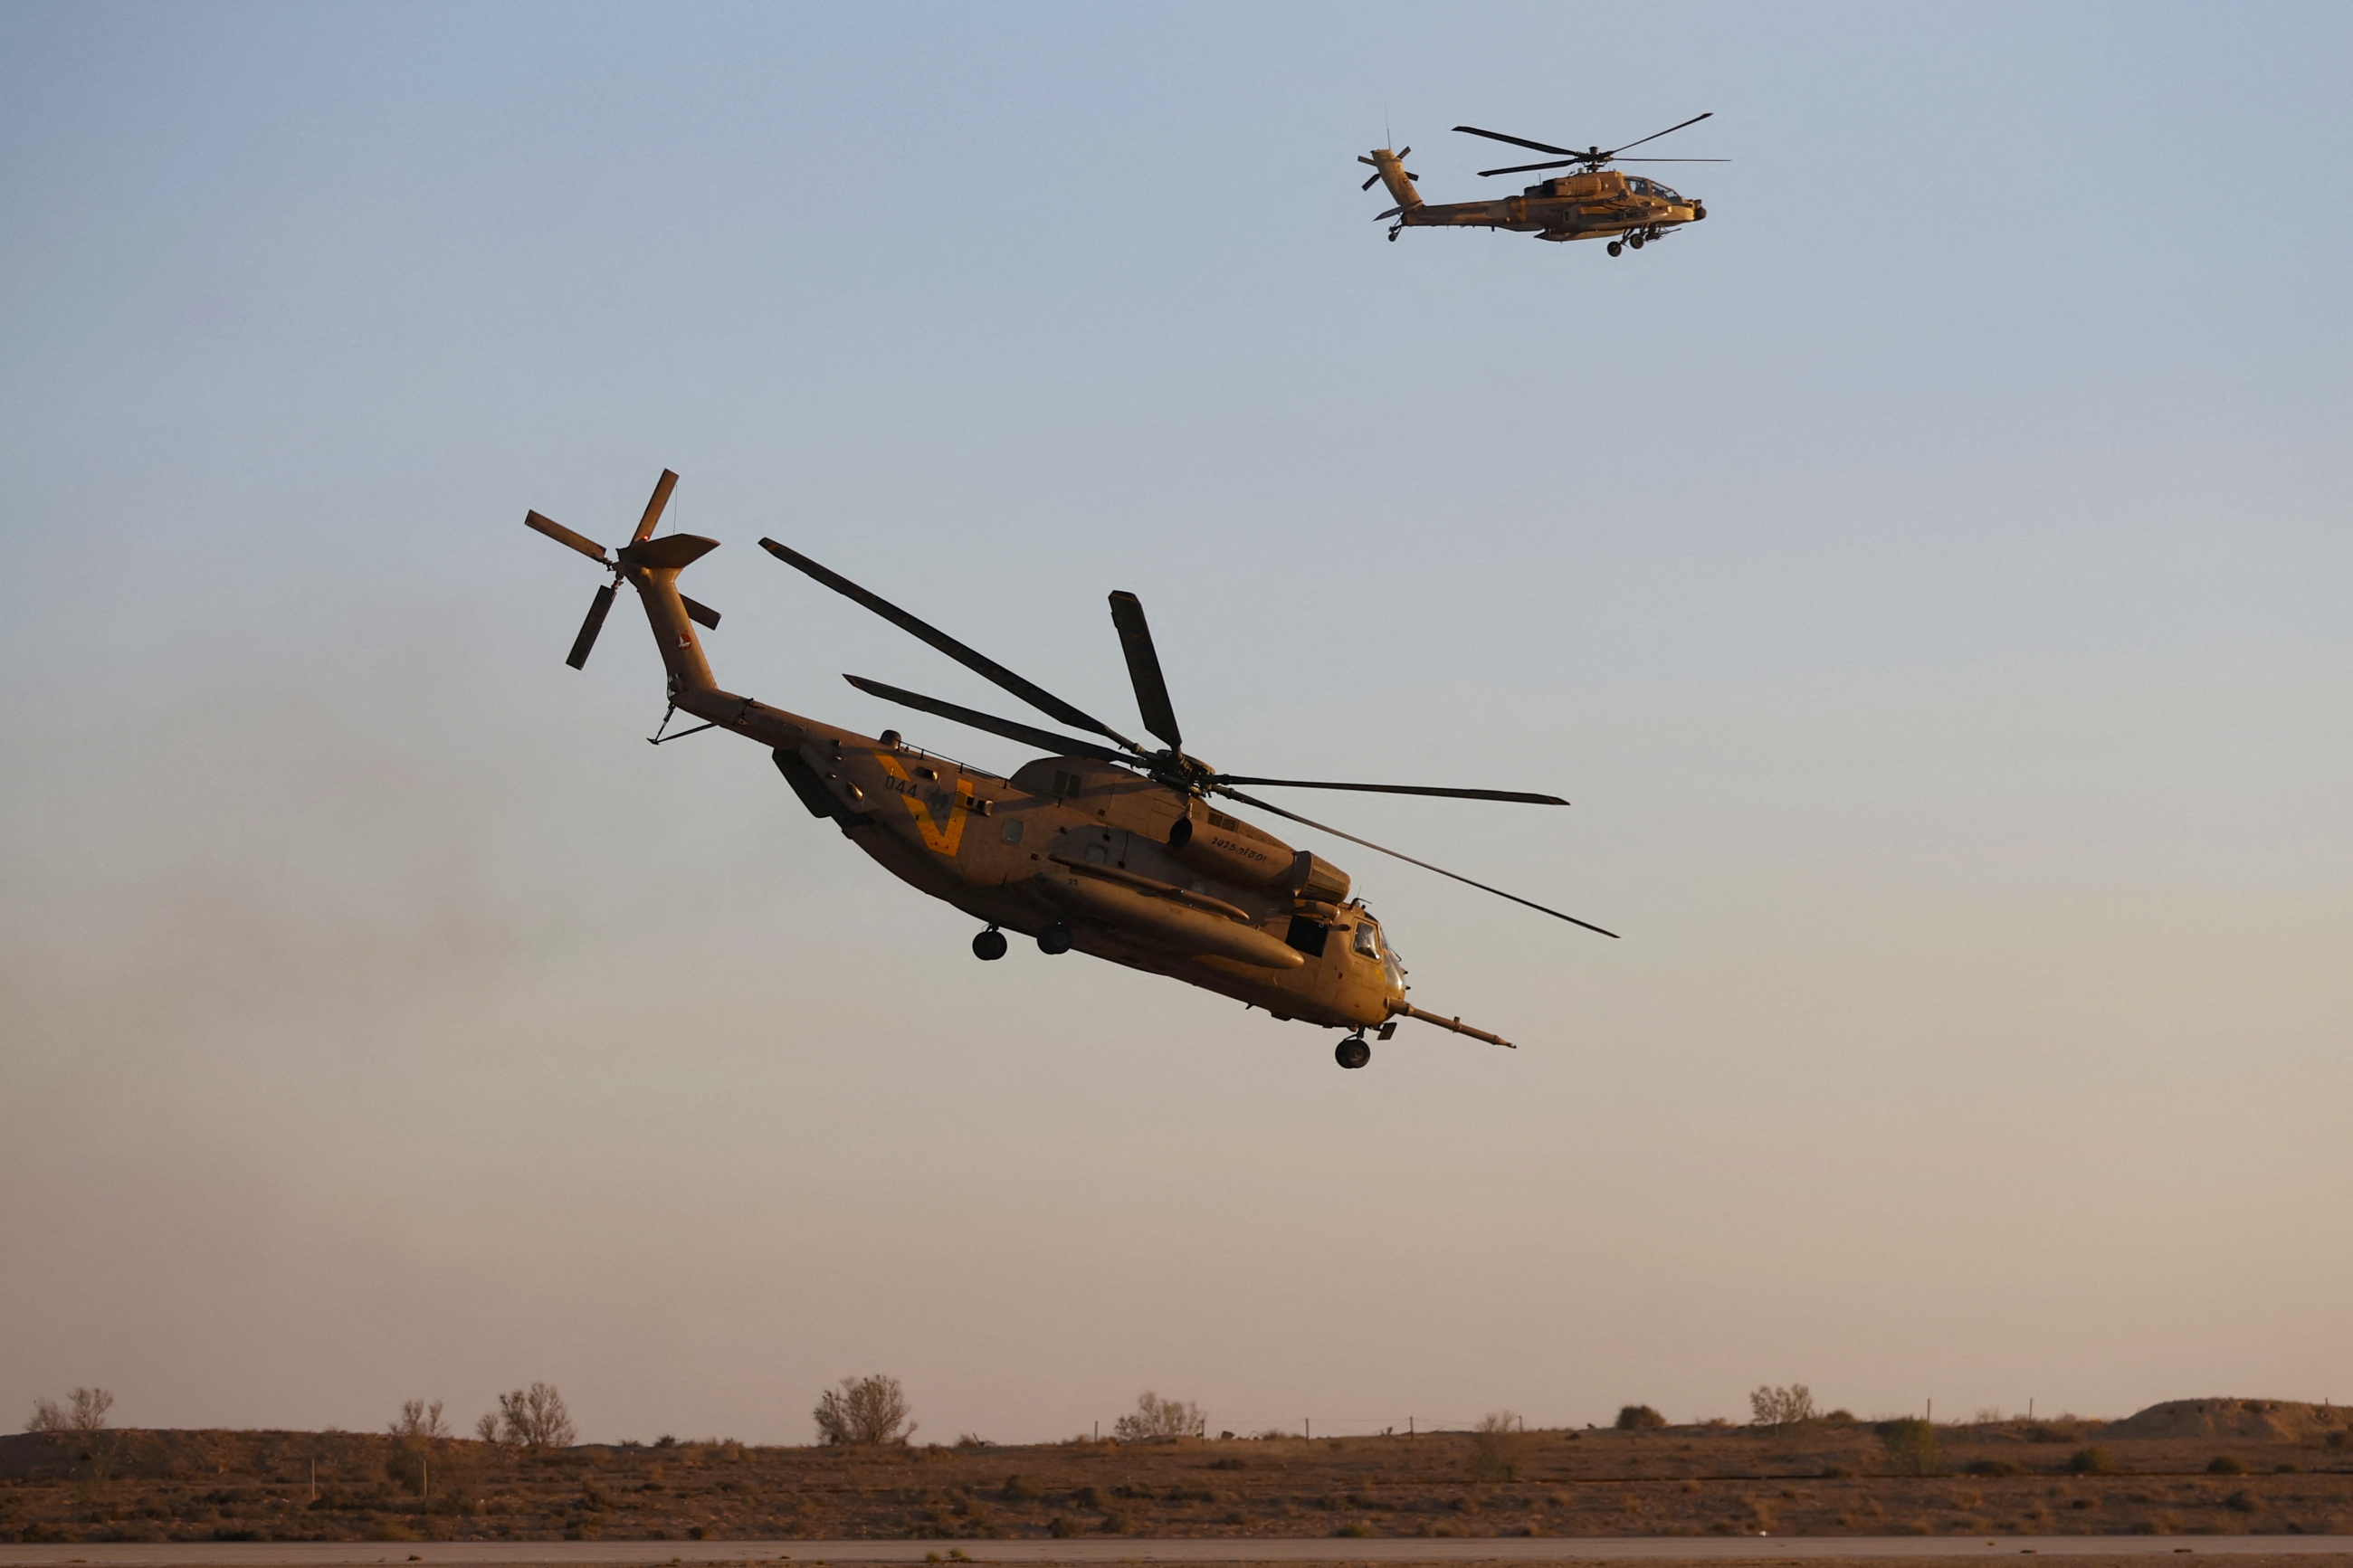 Israeli Sikorsky CH-53 Yasur 2025 helicopters